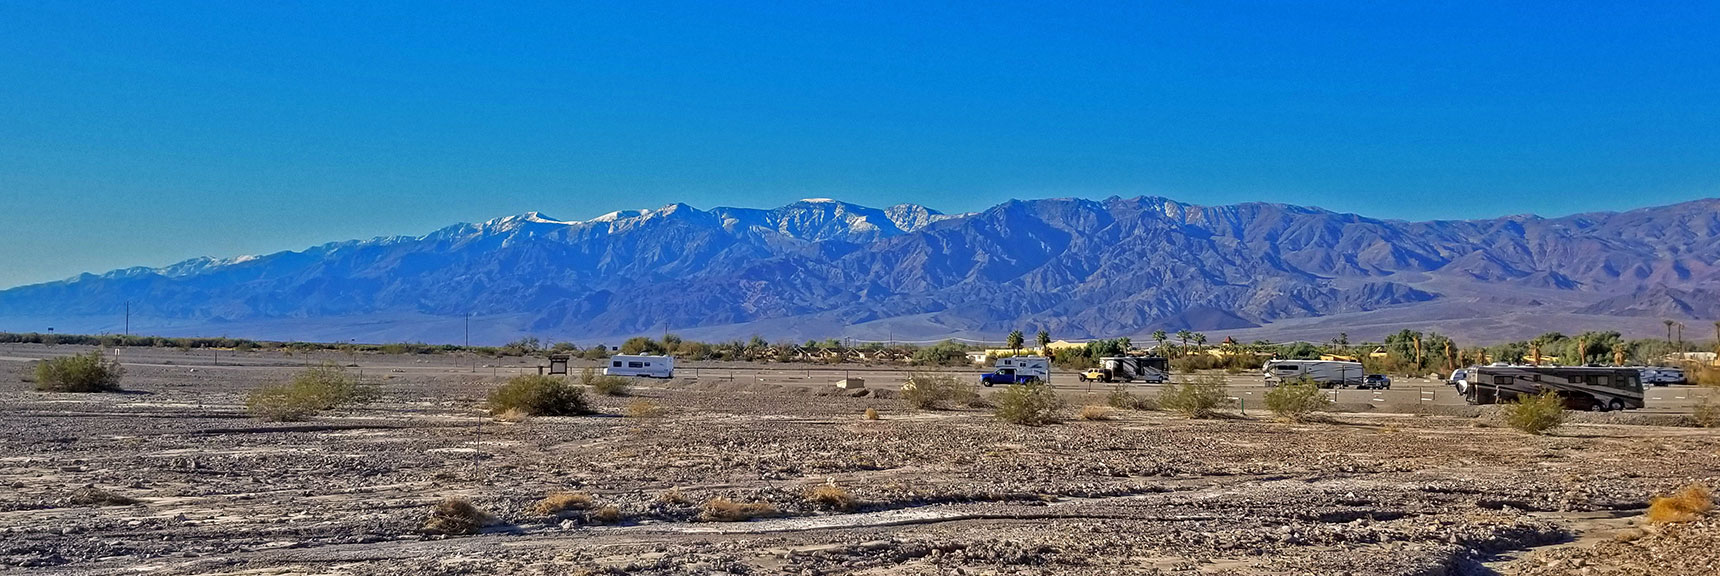 Snow-Covered Telescope Peak, Bennett, Roger's and Wildrose Peaks in Panamint Mountain Range | Tea House & Table Rock Circuit | Furnace Creek | Death Valley National Park, California